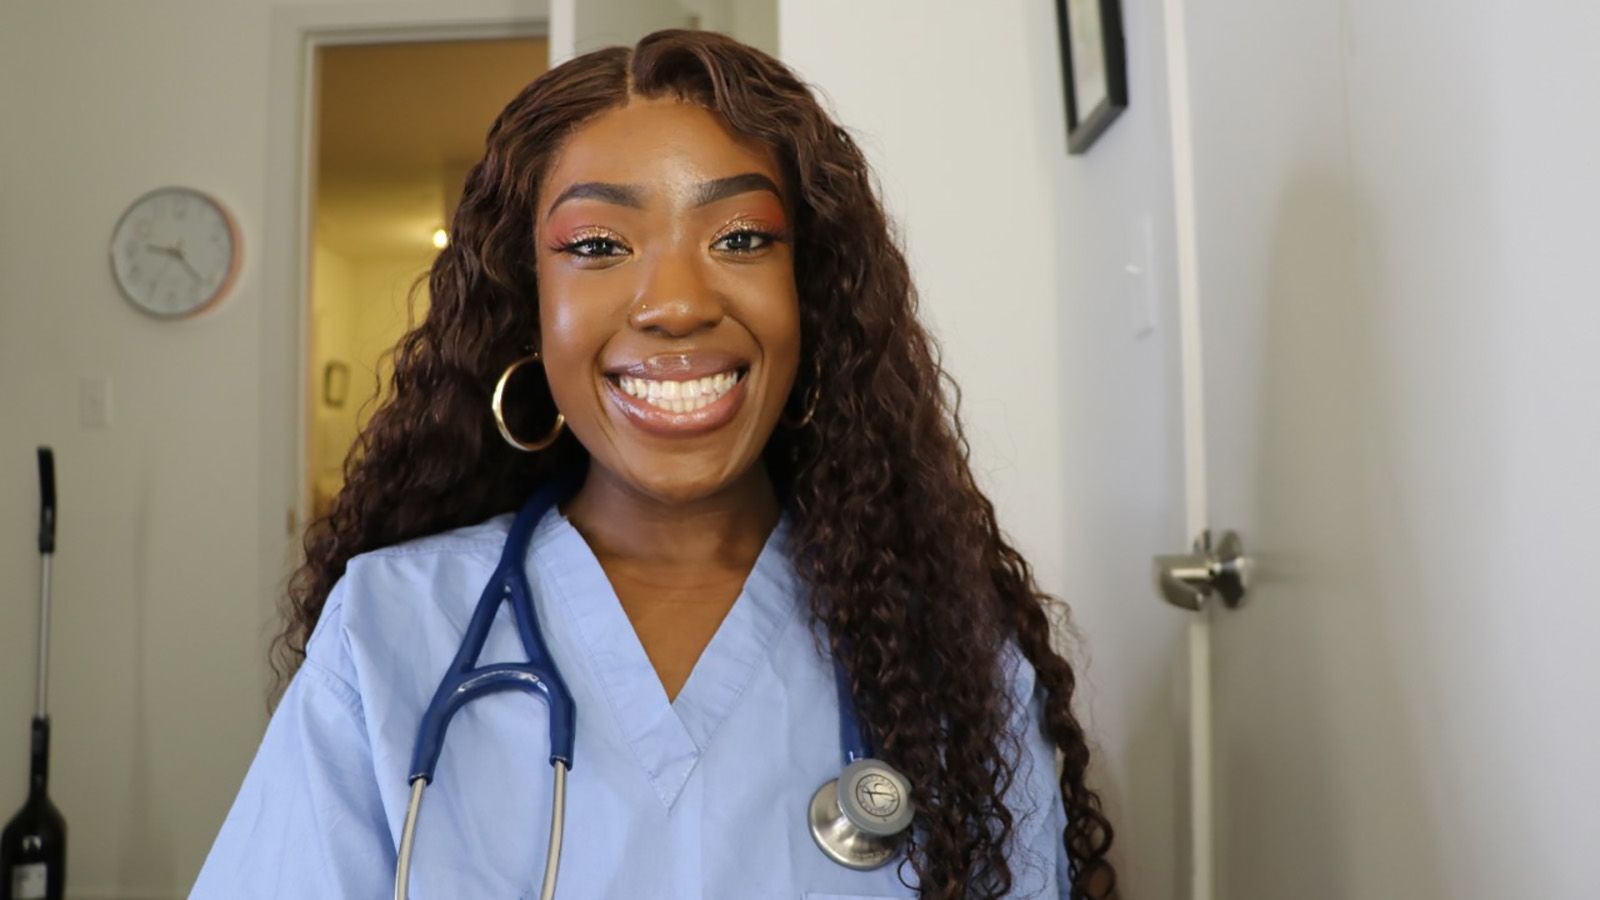 Only 5.7% of US doctors are Black, and experts warn the shortage harms  public health